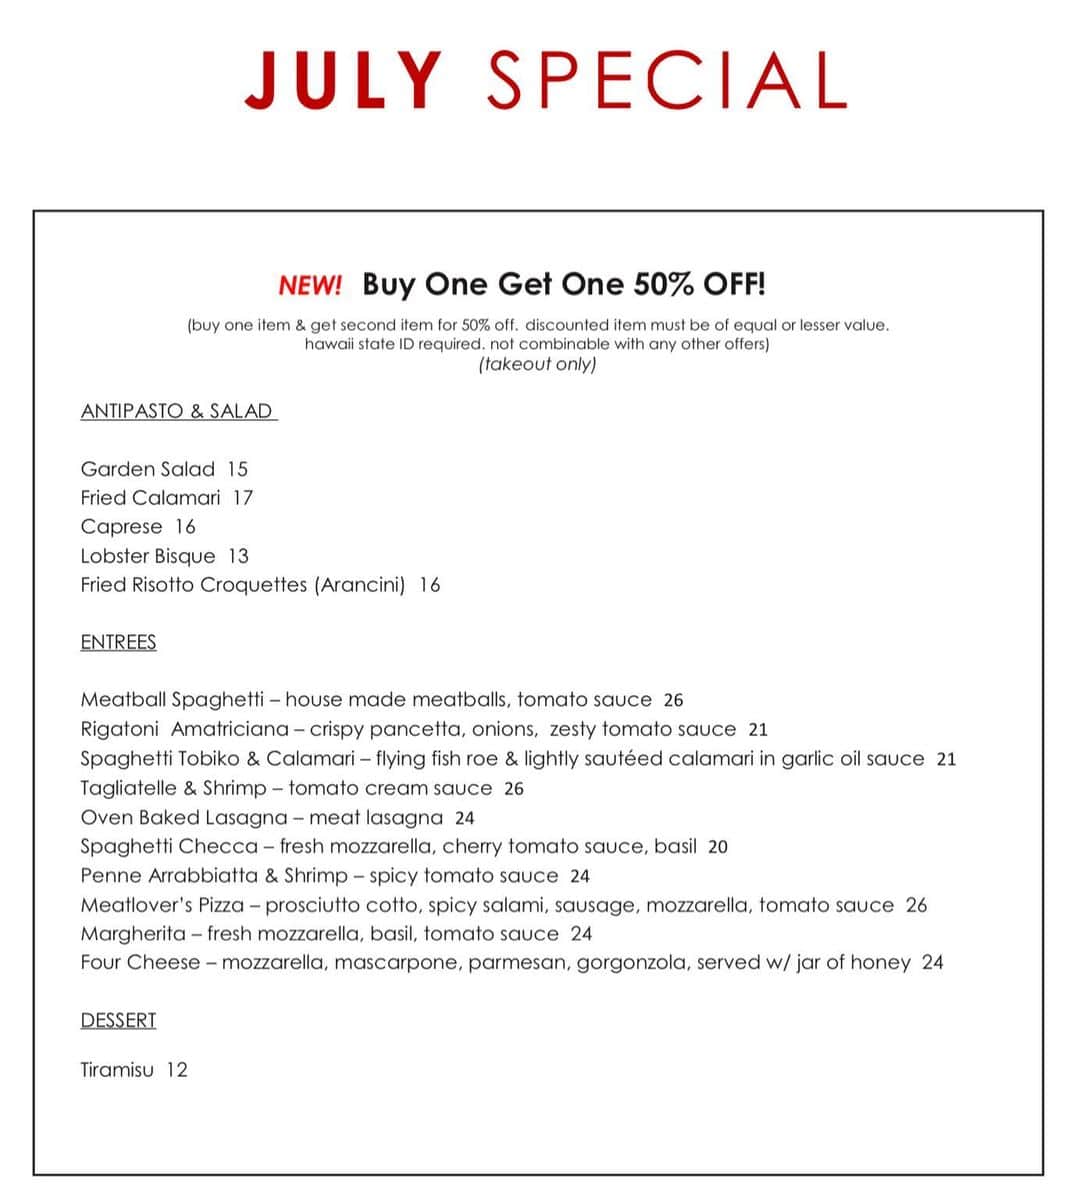 Arancino Di Mareのインスタグラム：「NEW! • J U L Y ‘BOGO’  S P E C I A L •  buy one & get second item for 50% off! (w/ Hawaii state ID / take out only)」